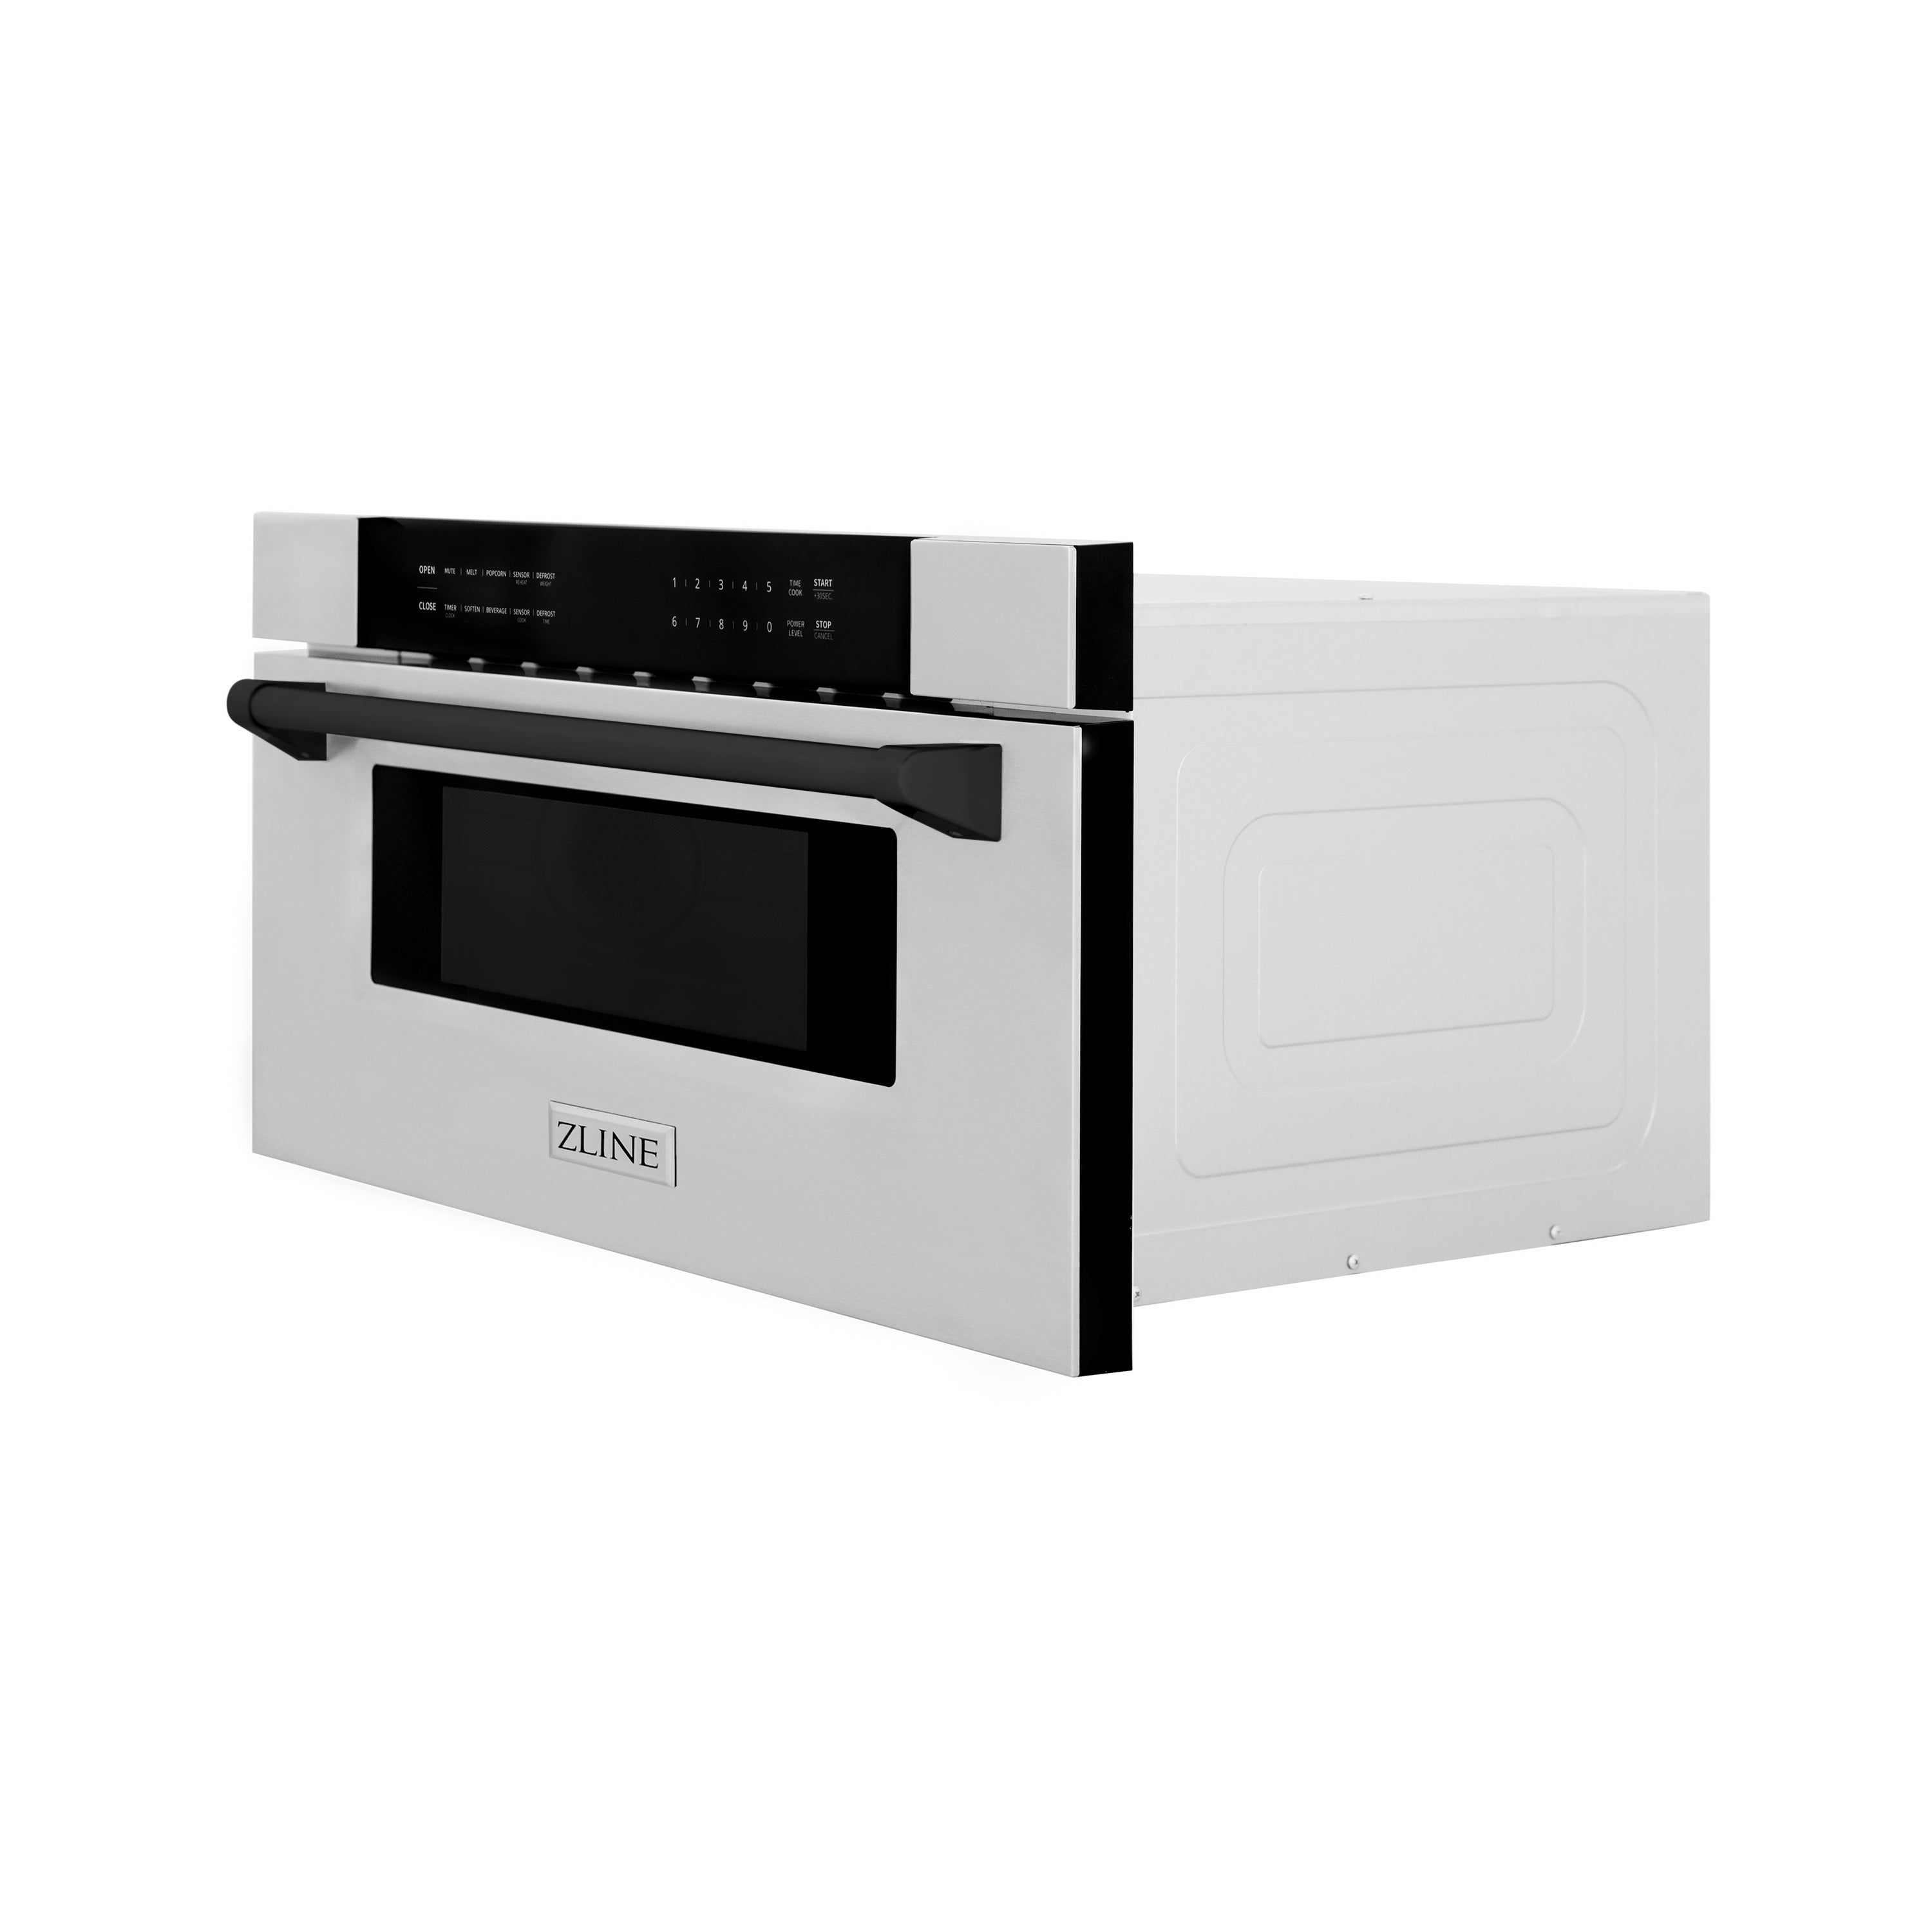 ZLINE Autograph Edition 30 in. 1.2 cu. ft. Built-In Microwave Drawer in Stainless Steel with Matte Black Accents (MWDZ-30-MB) Side View Drawer Closed